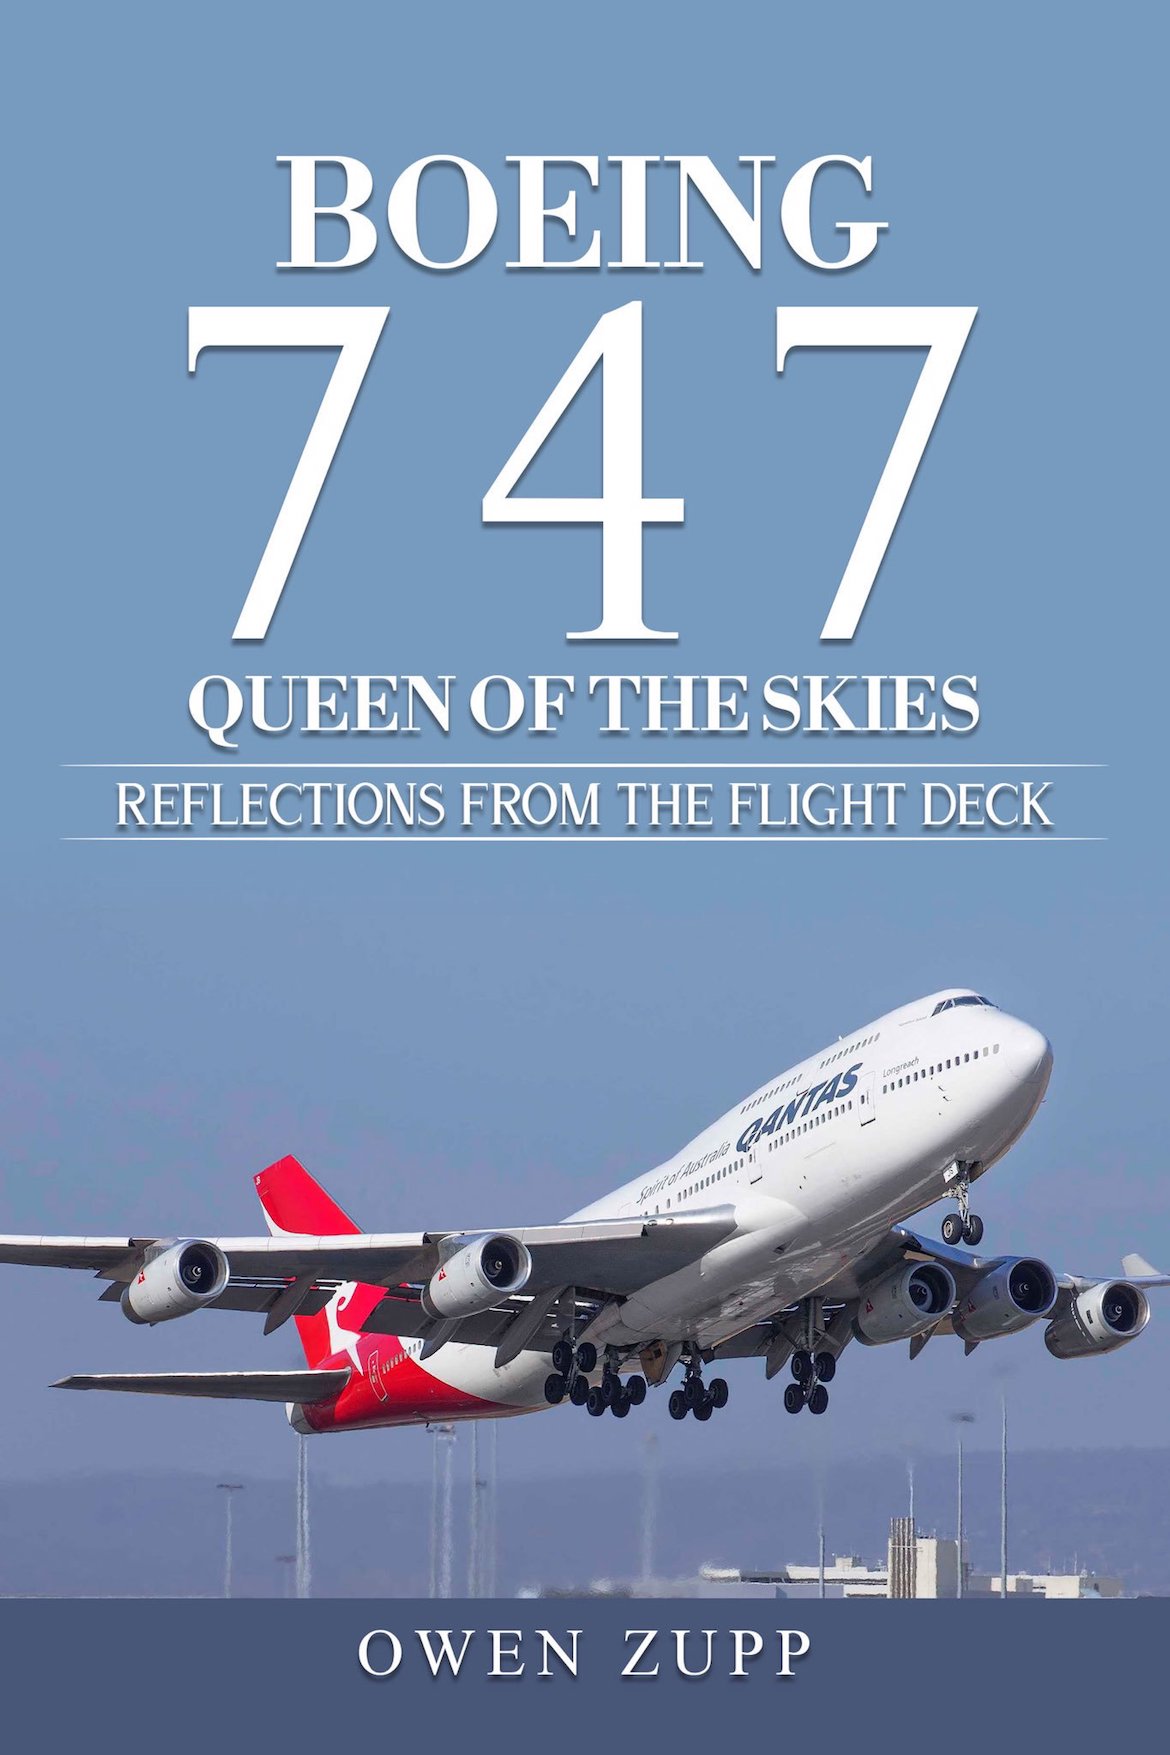 Boeing 747 - Queen of the Skies. Reflections from the Flight Deck by Owen Zupp.